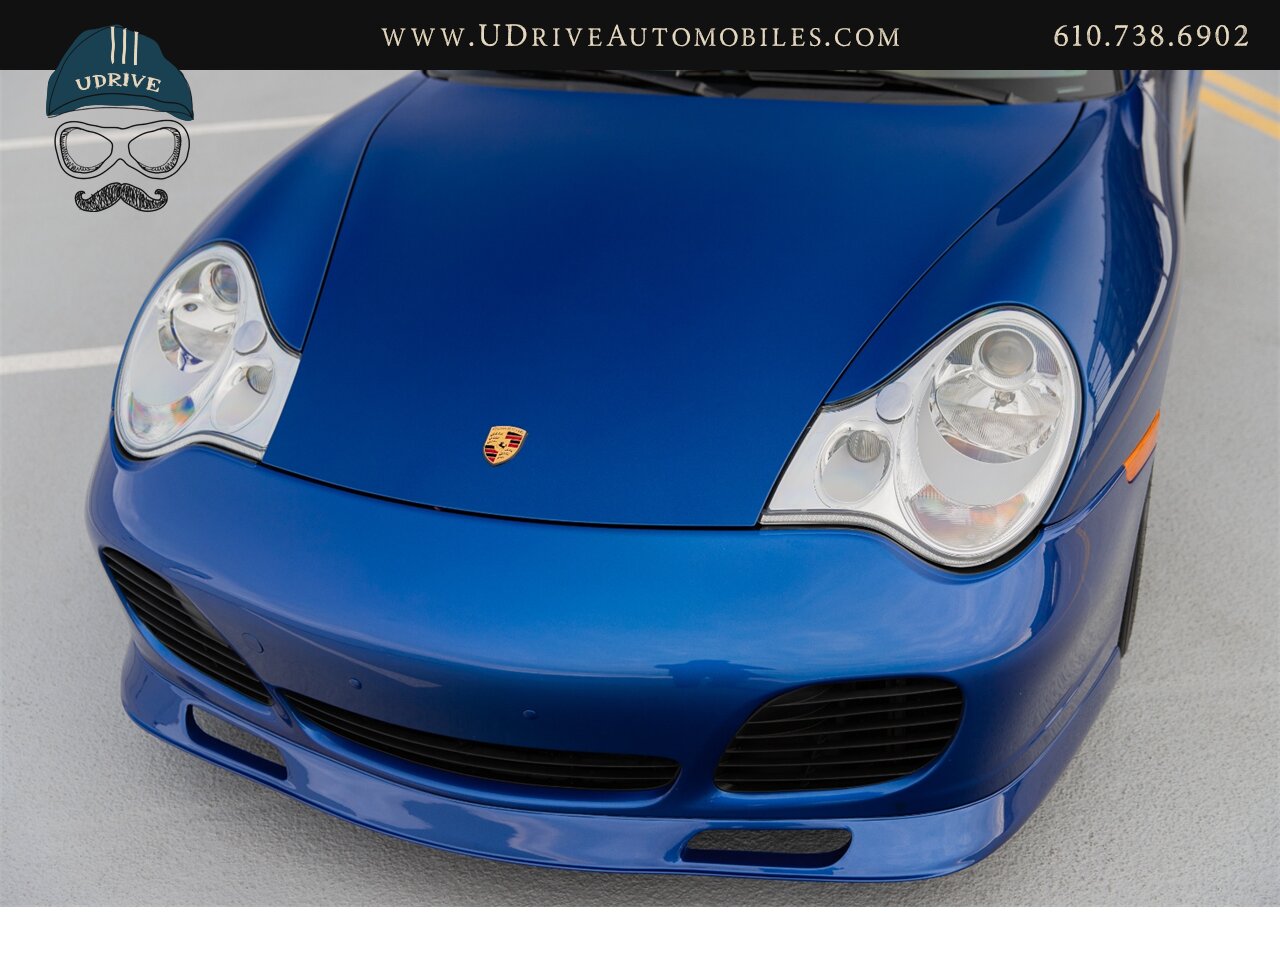 2005 Porsche 911 Turbo S Factory Aerokit Extremely Rare Cobalt Blue  Yellow Deviating Stitching 1 of a Kind Spec $160k MSRP - Photo 12 - West Chester, PA 19382